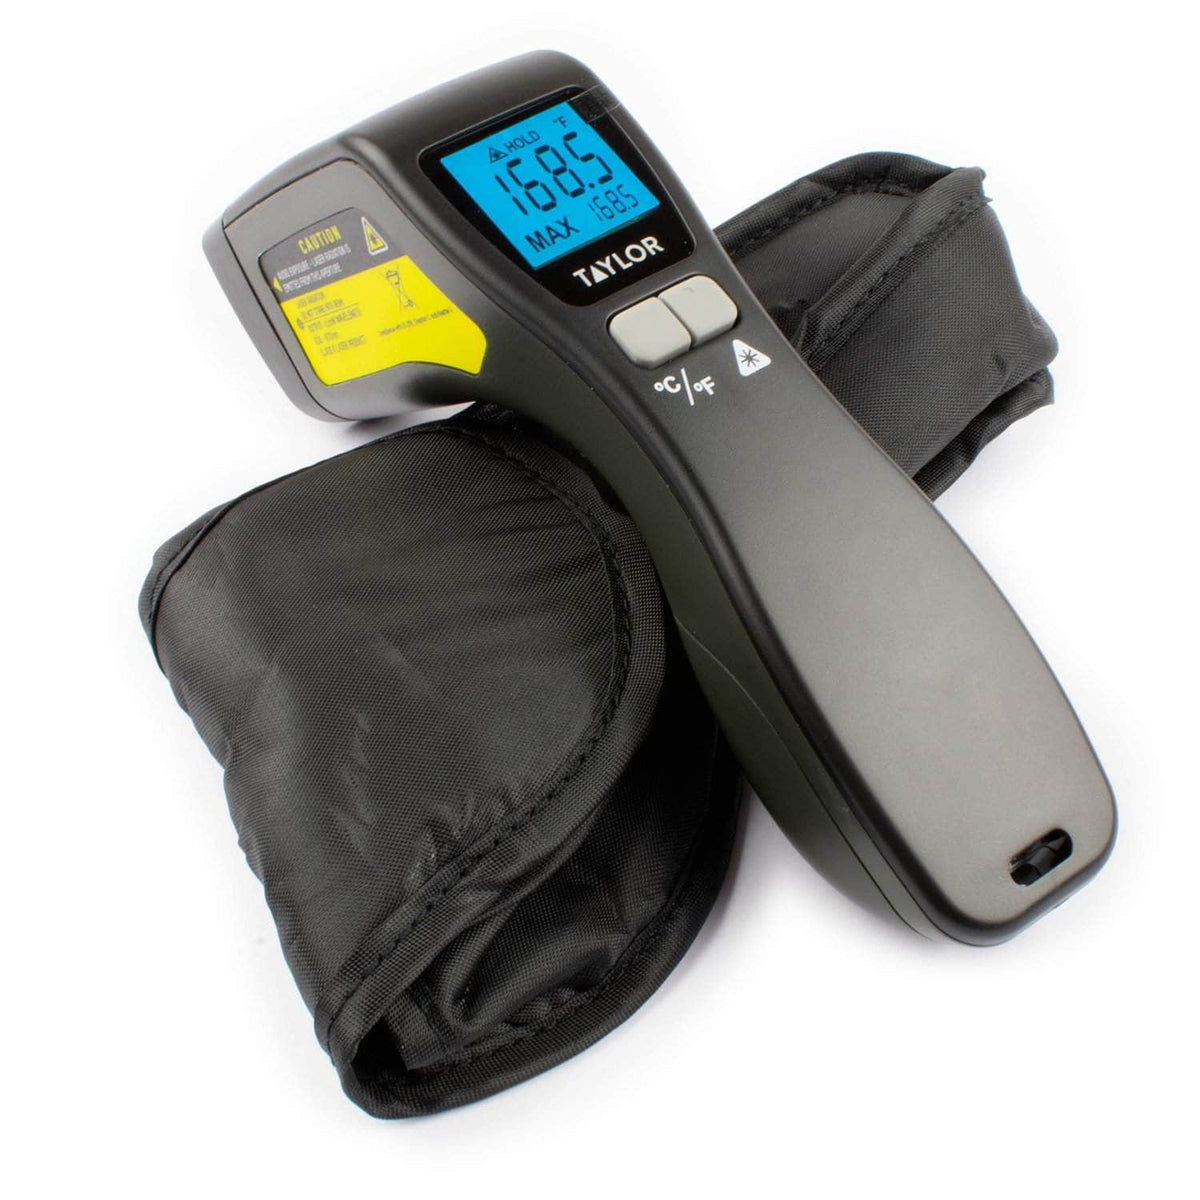 *New* Non-Contact Infrared Laser Thermometer